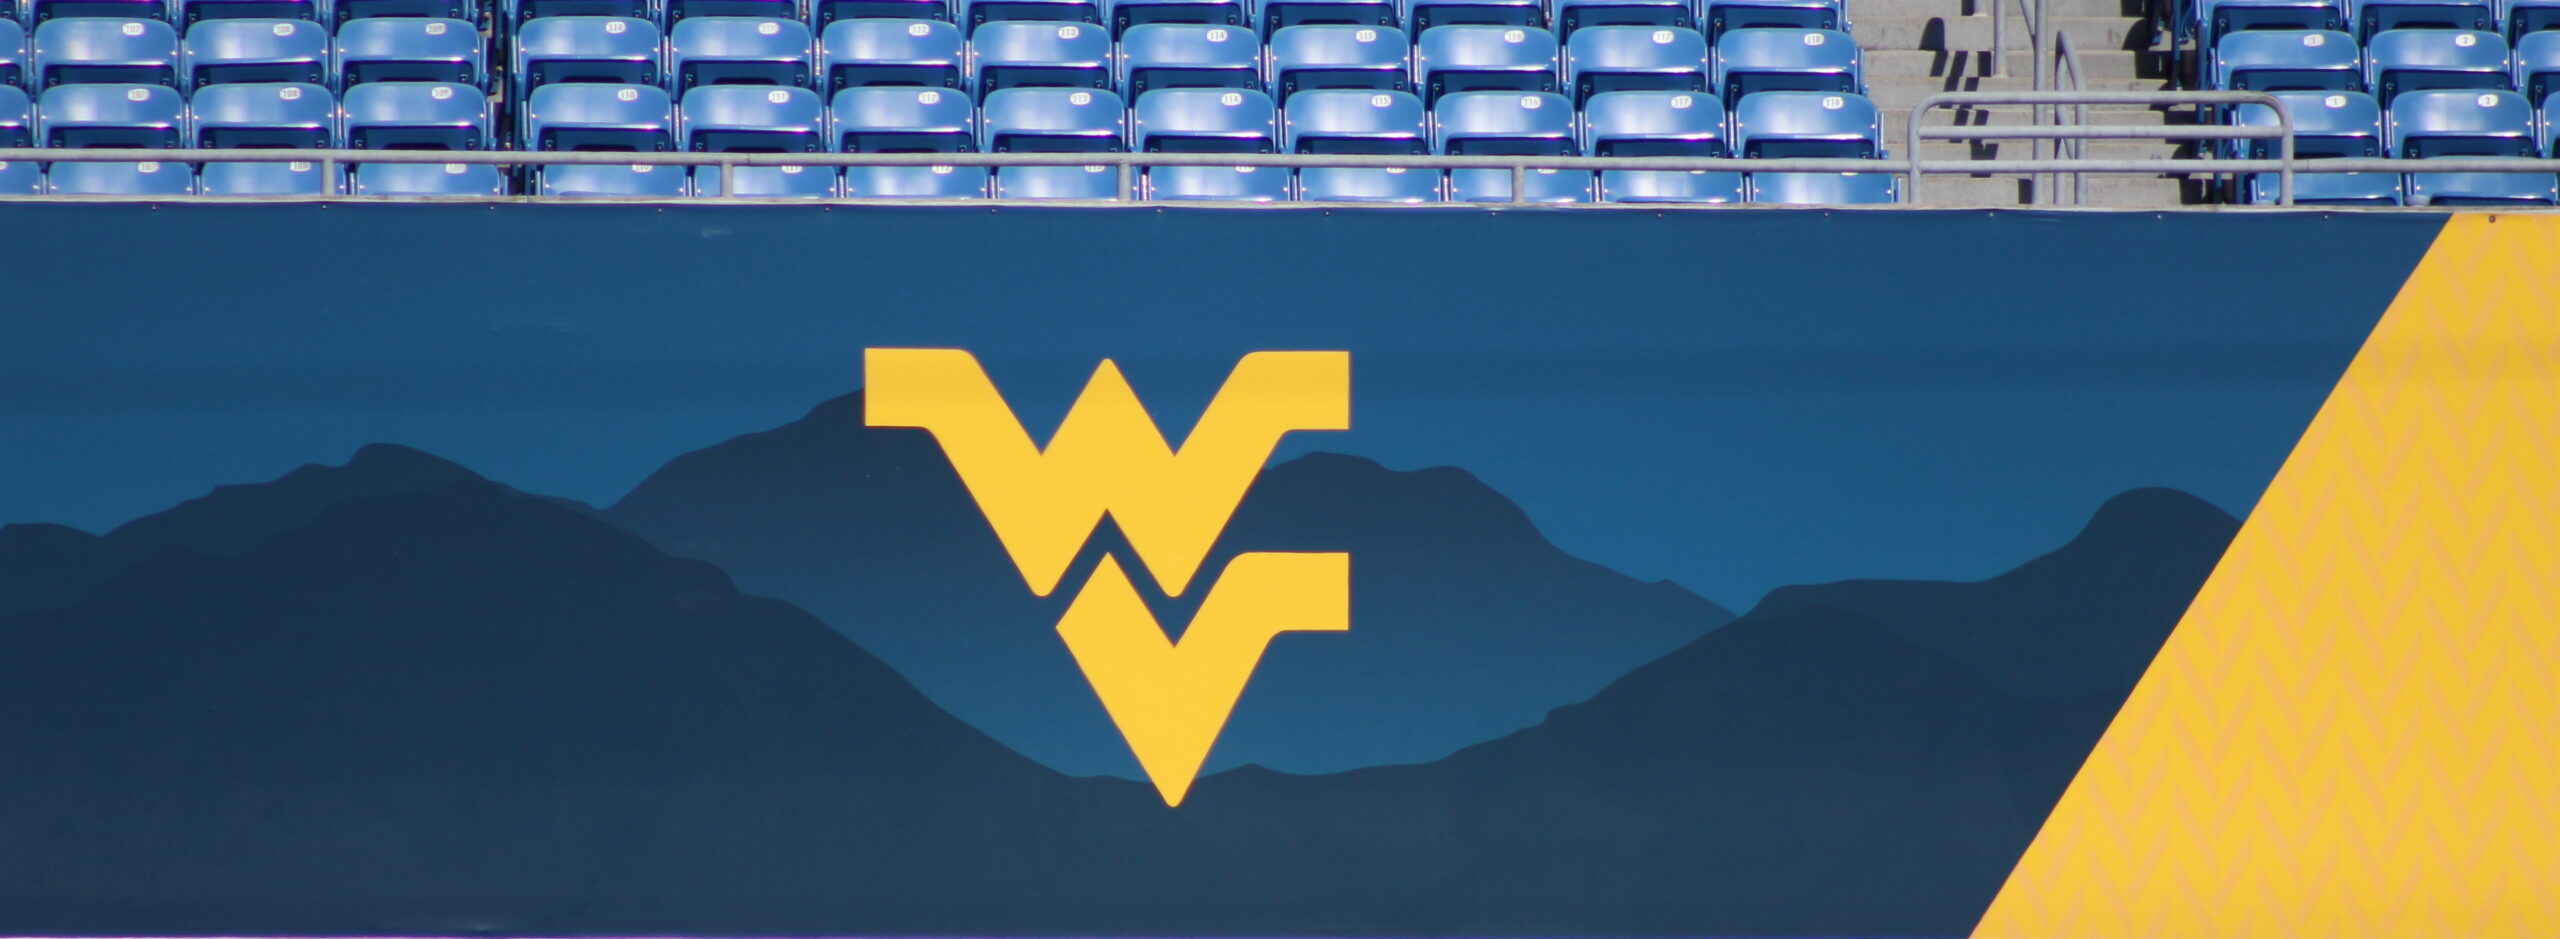 Eight new members added to WVU Sports Hall of Fame